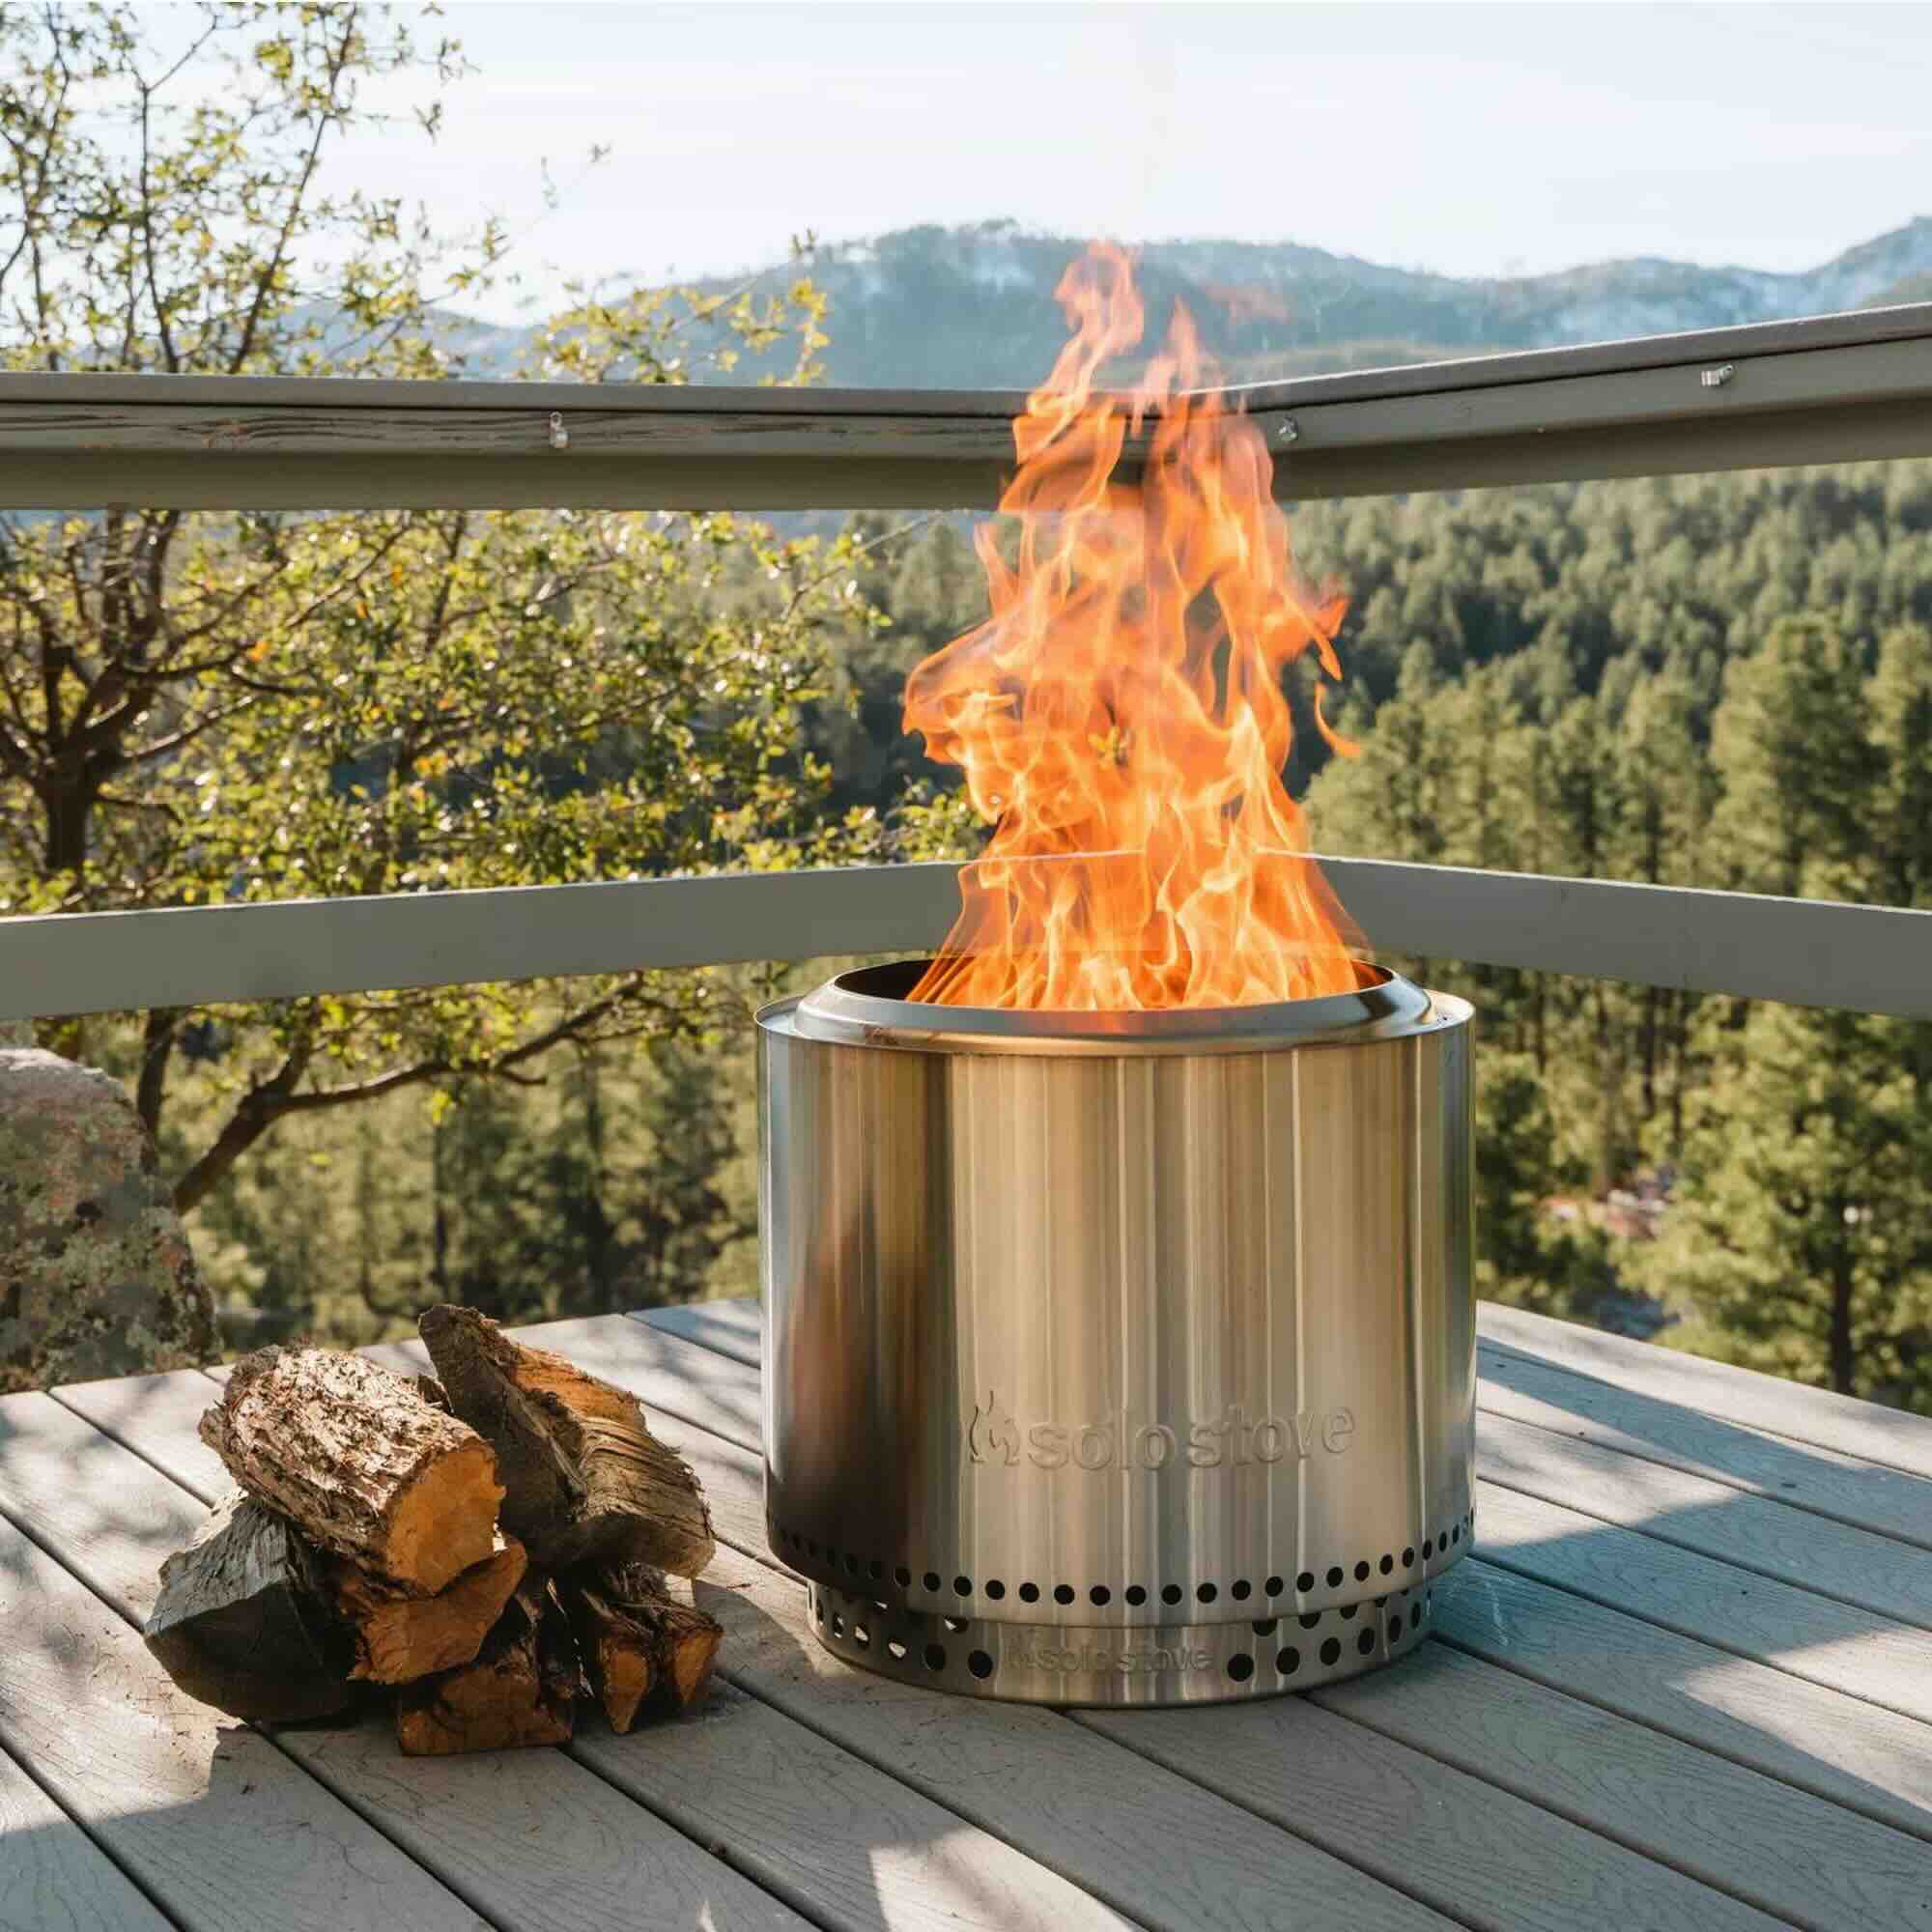 How To Clean A Solo Stove Fire Pit